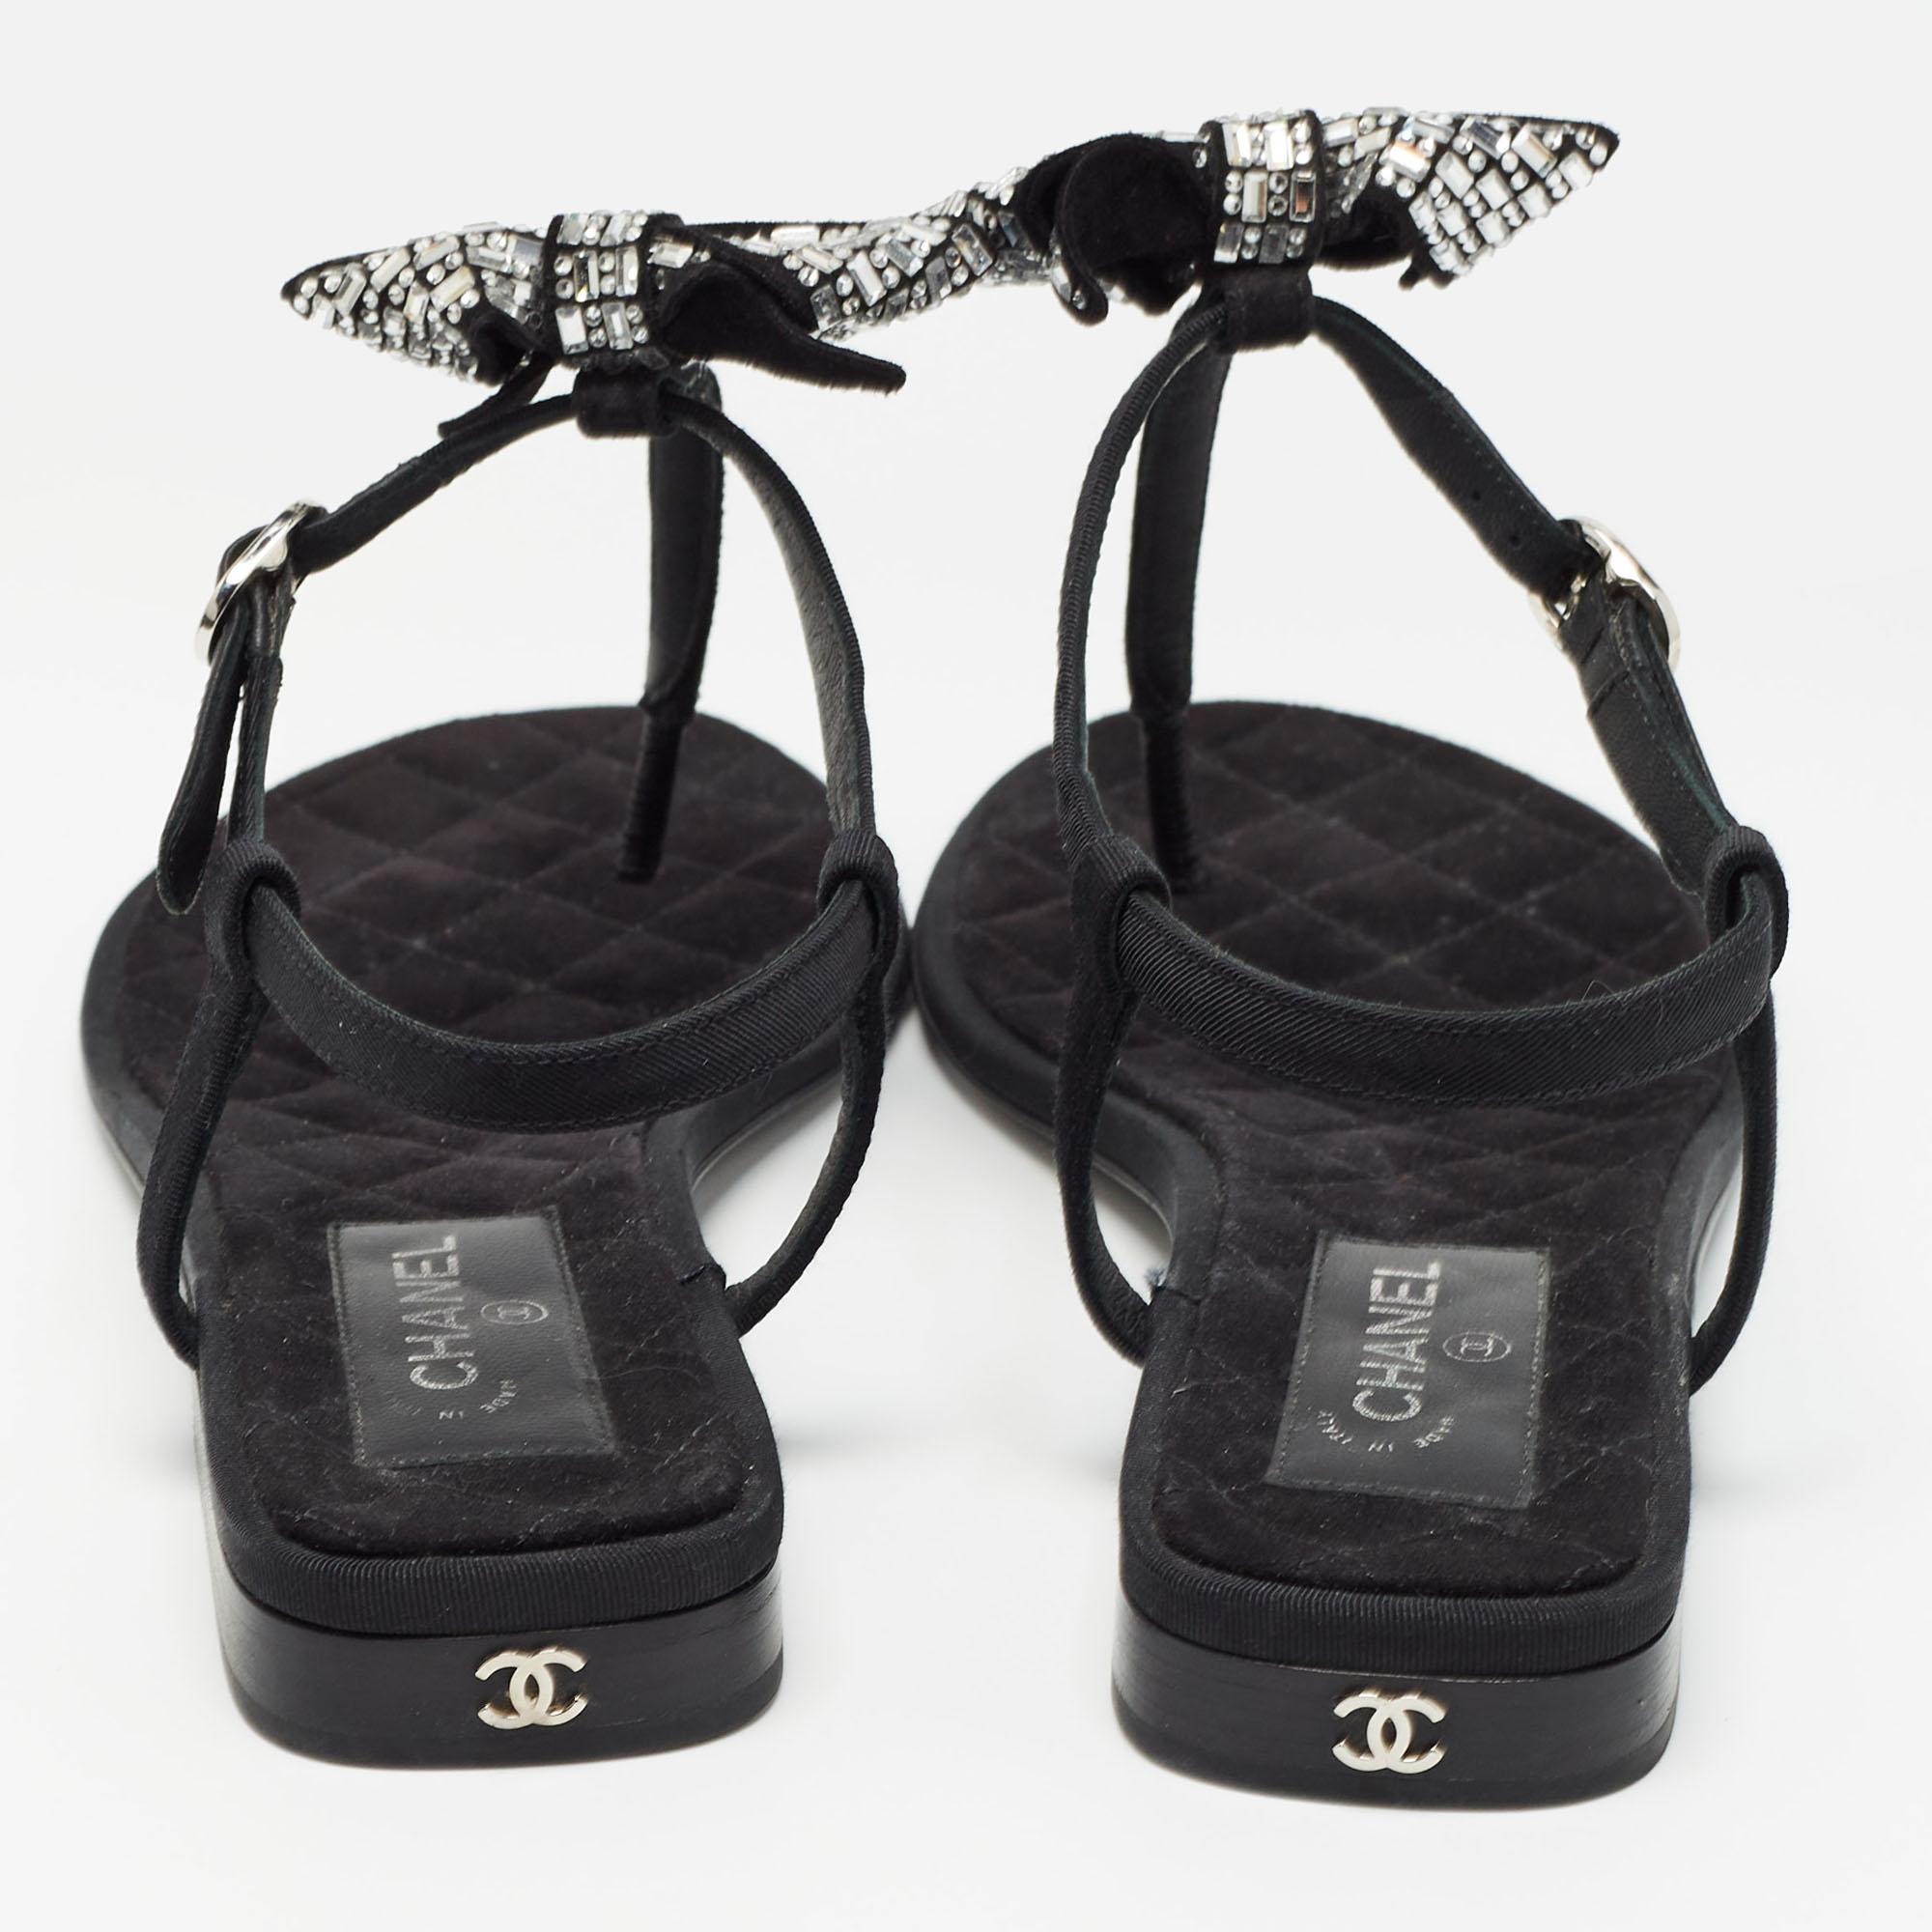 Don't these sandals from Chanel look absolutely regal and resplendent. These fabulous black sandals enchant with their canvas exterior and suede- lined insole. With embellishments on the upper, they are worth every penny you invest. The pair